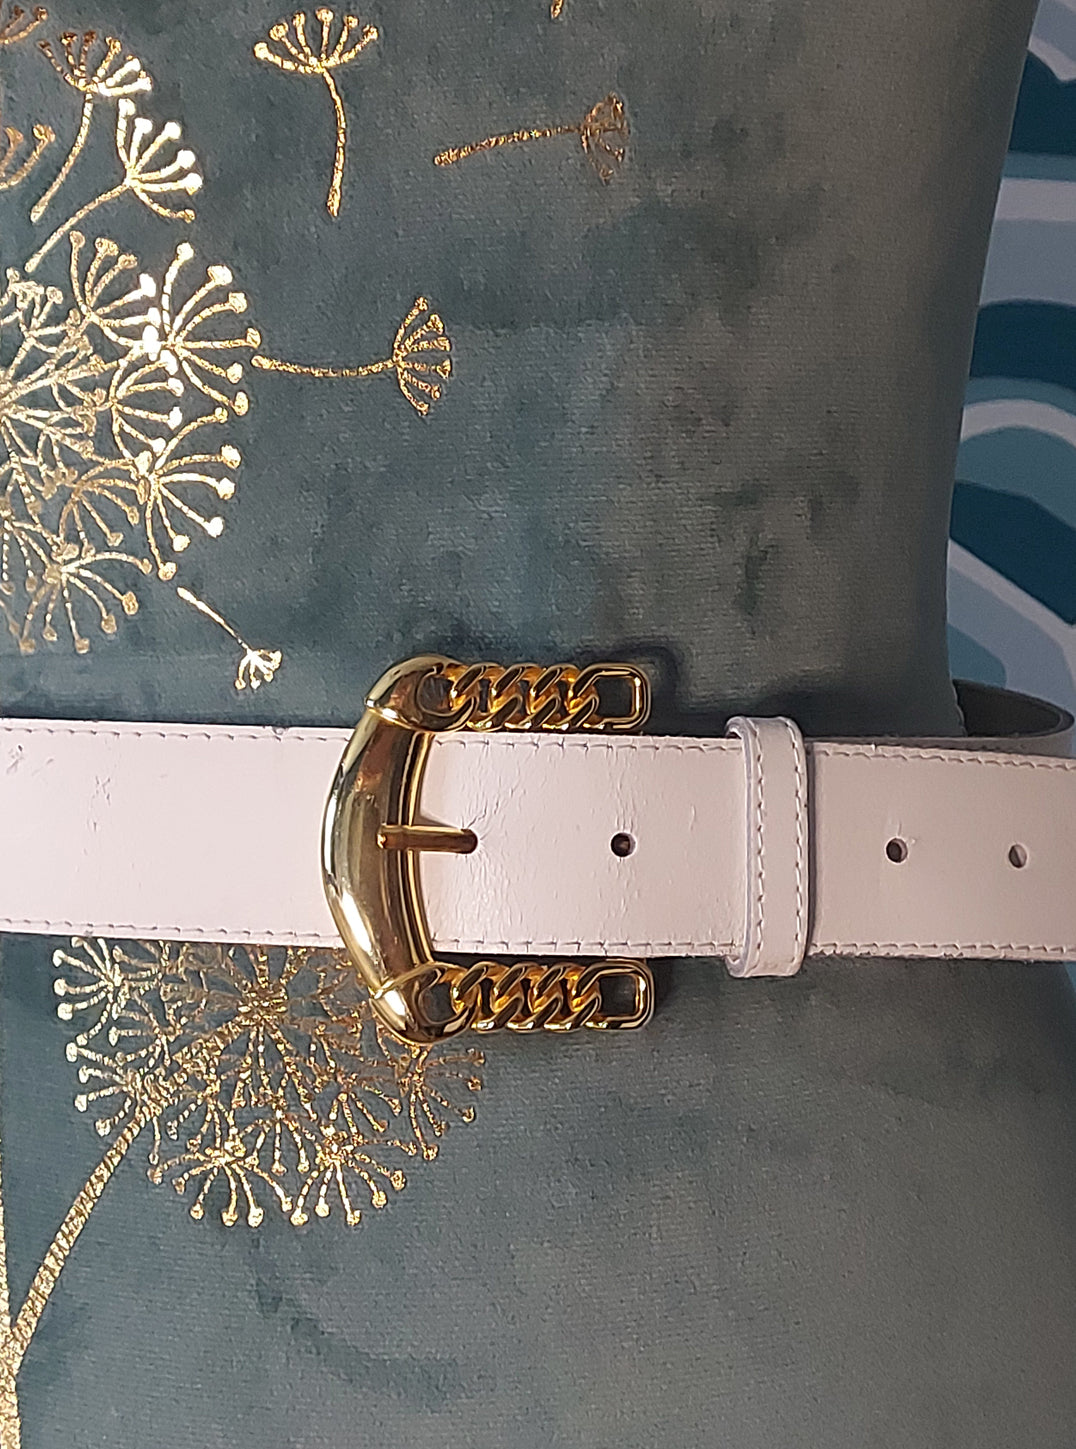 Close up of gold buckle on white belt